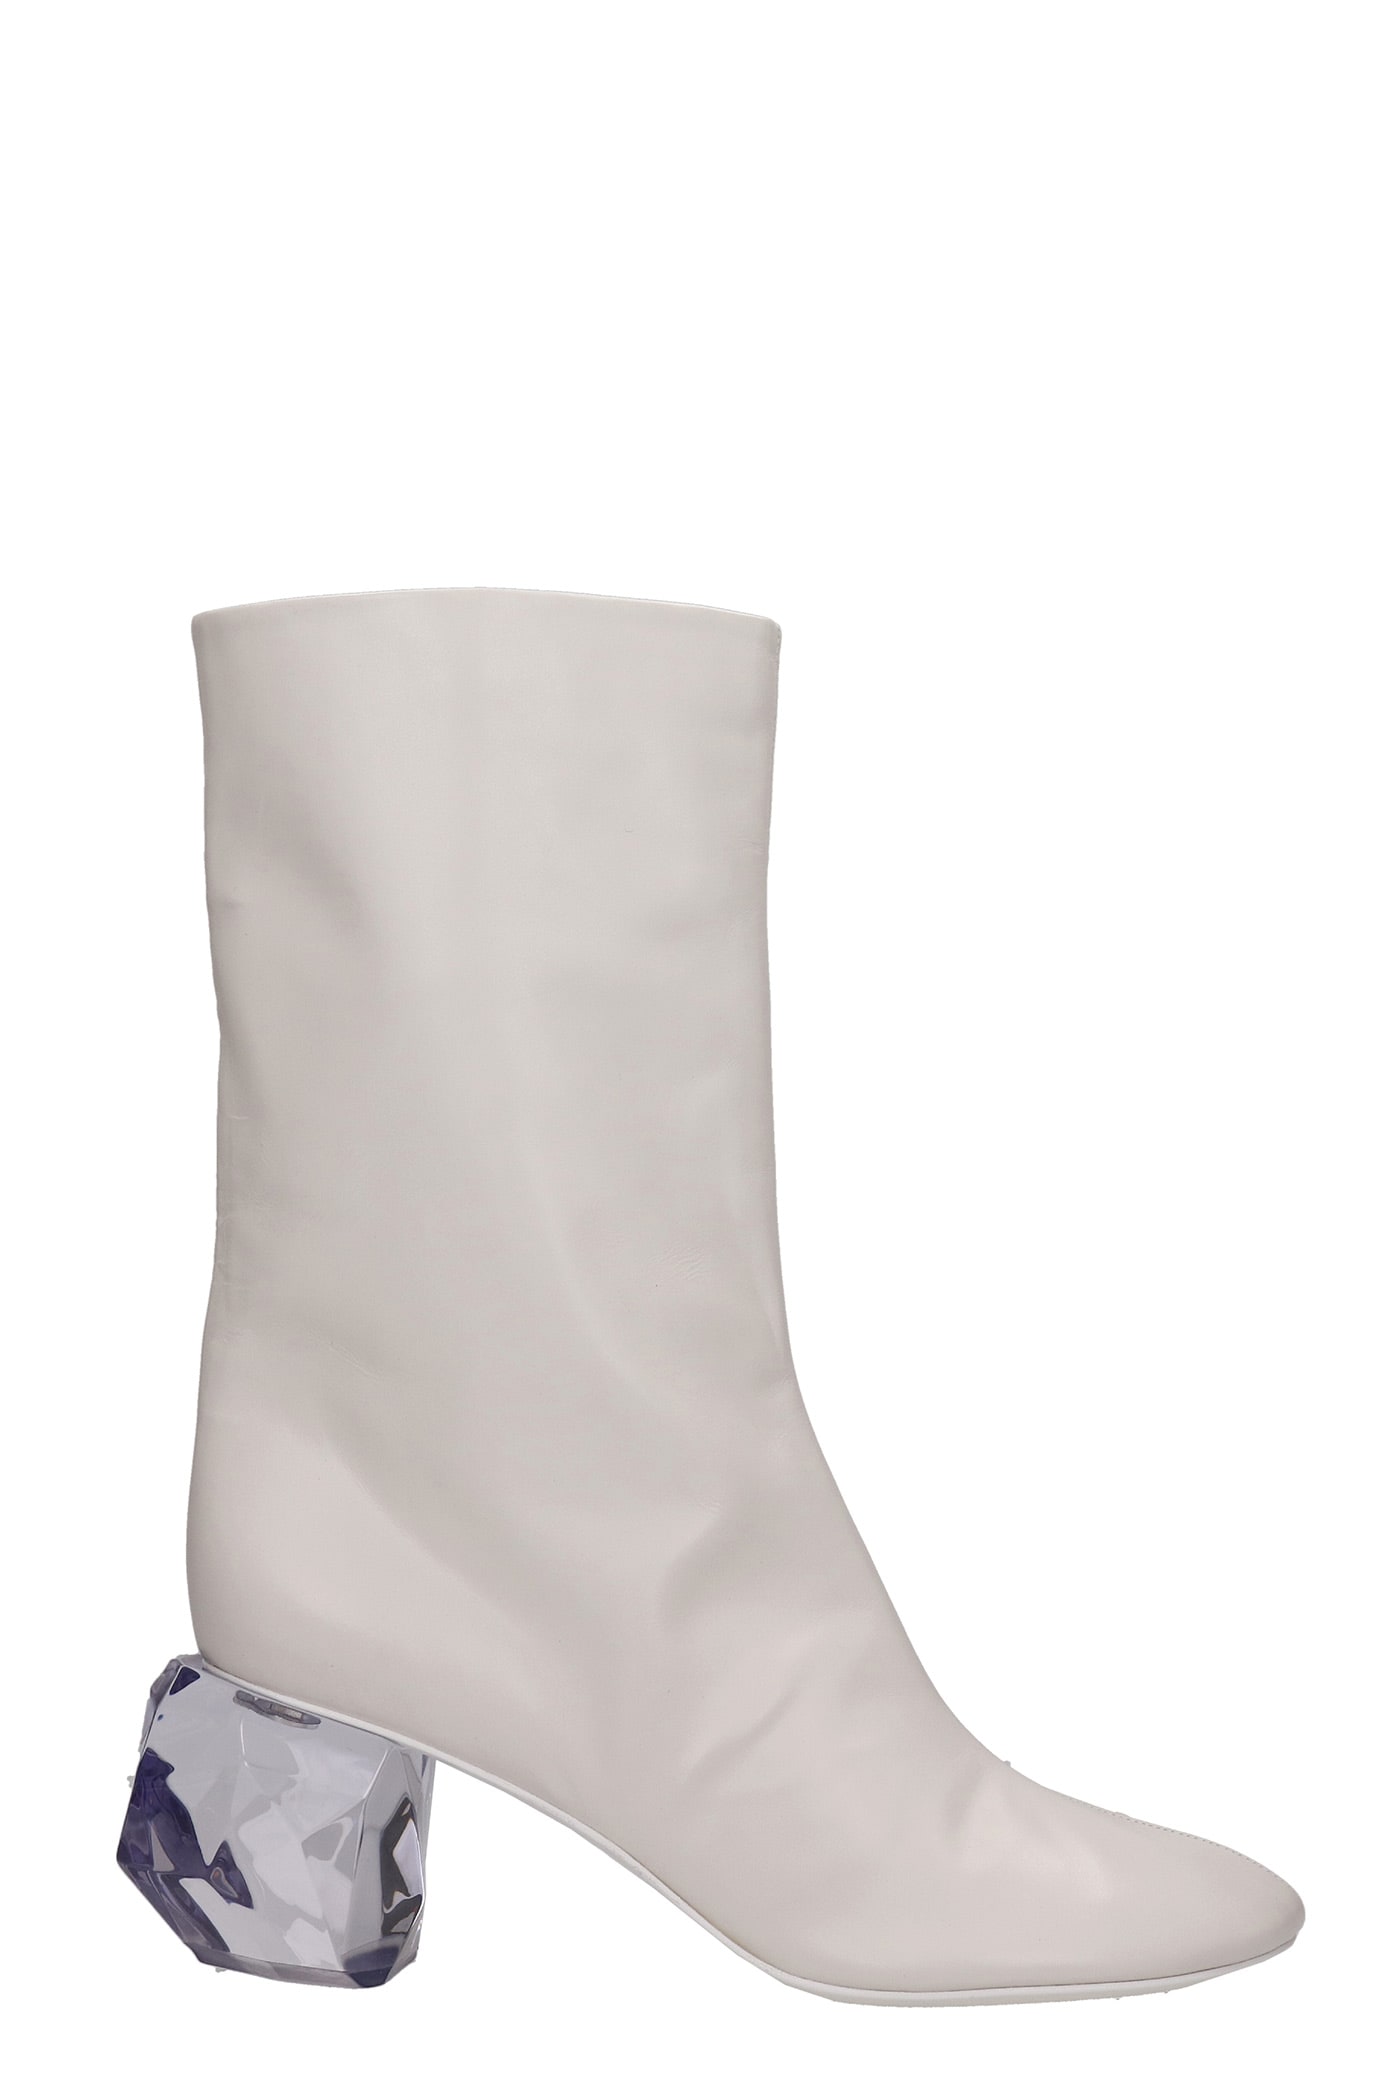 Jil Sander High Heels Ankle Boots In White Leather